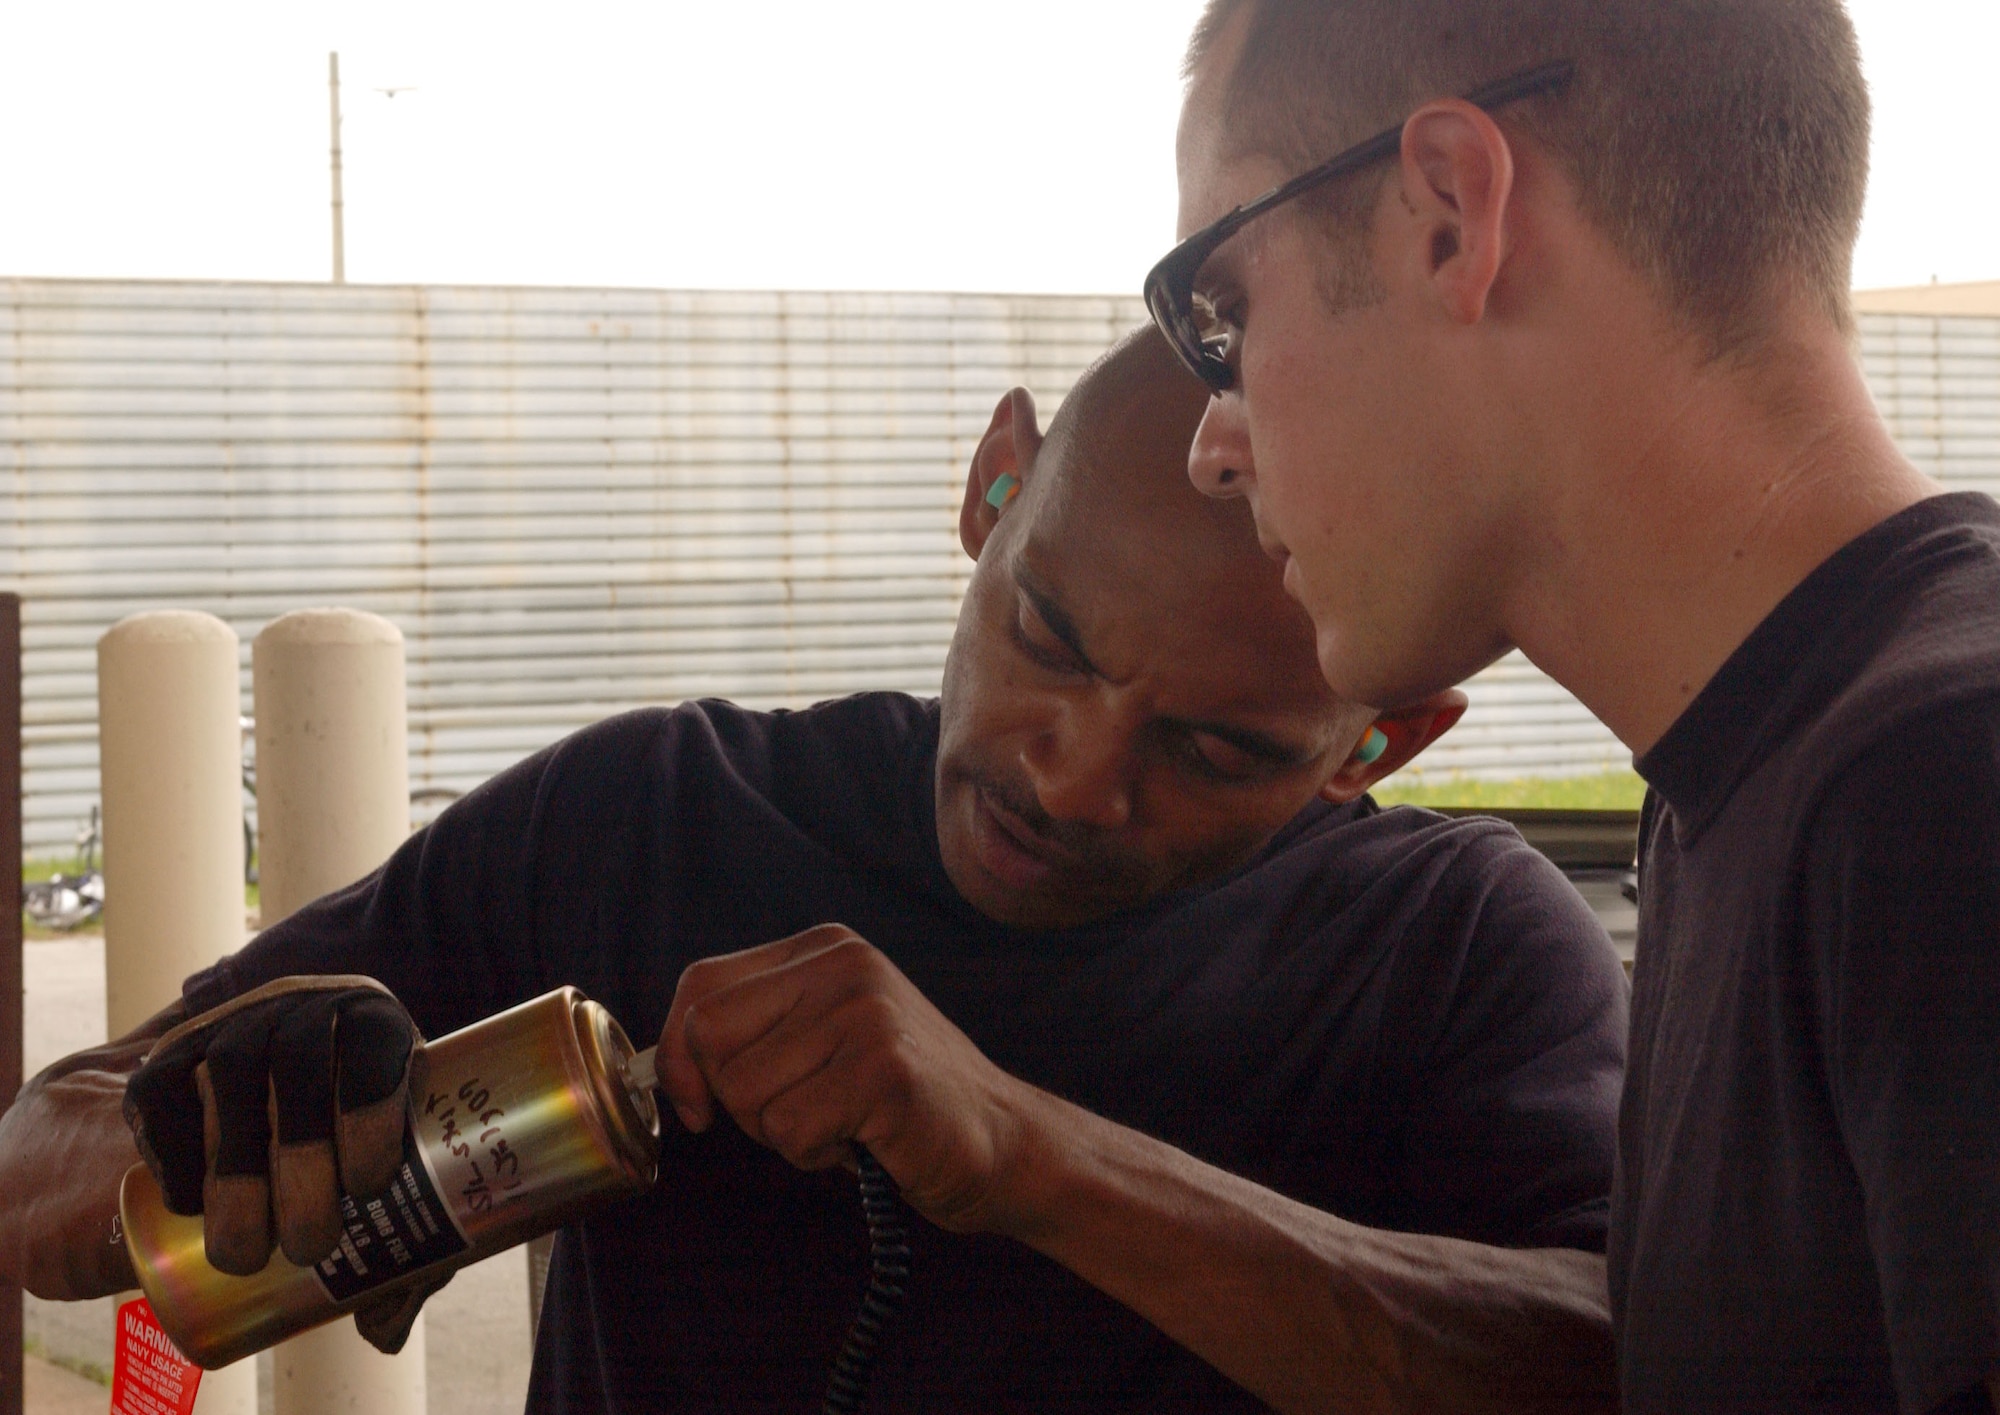 KUNSAN AIR BASE, Republic of Korea --  Staff Sgt. Robert Thomas (Left), from the 31st Maintenance Squadron Aviano, AB Italy, shows how to assemble a fuse to Airman 1st Class Kale Wenzel, 8th MXS, during the CAPEX here July 11.  (U.S. Air Force photo/Senior Airman Steven R. Doty)                             